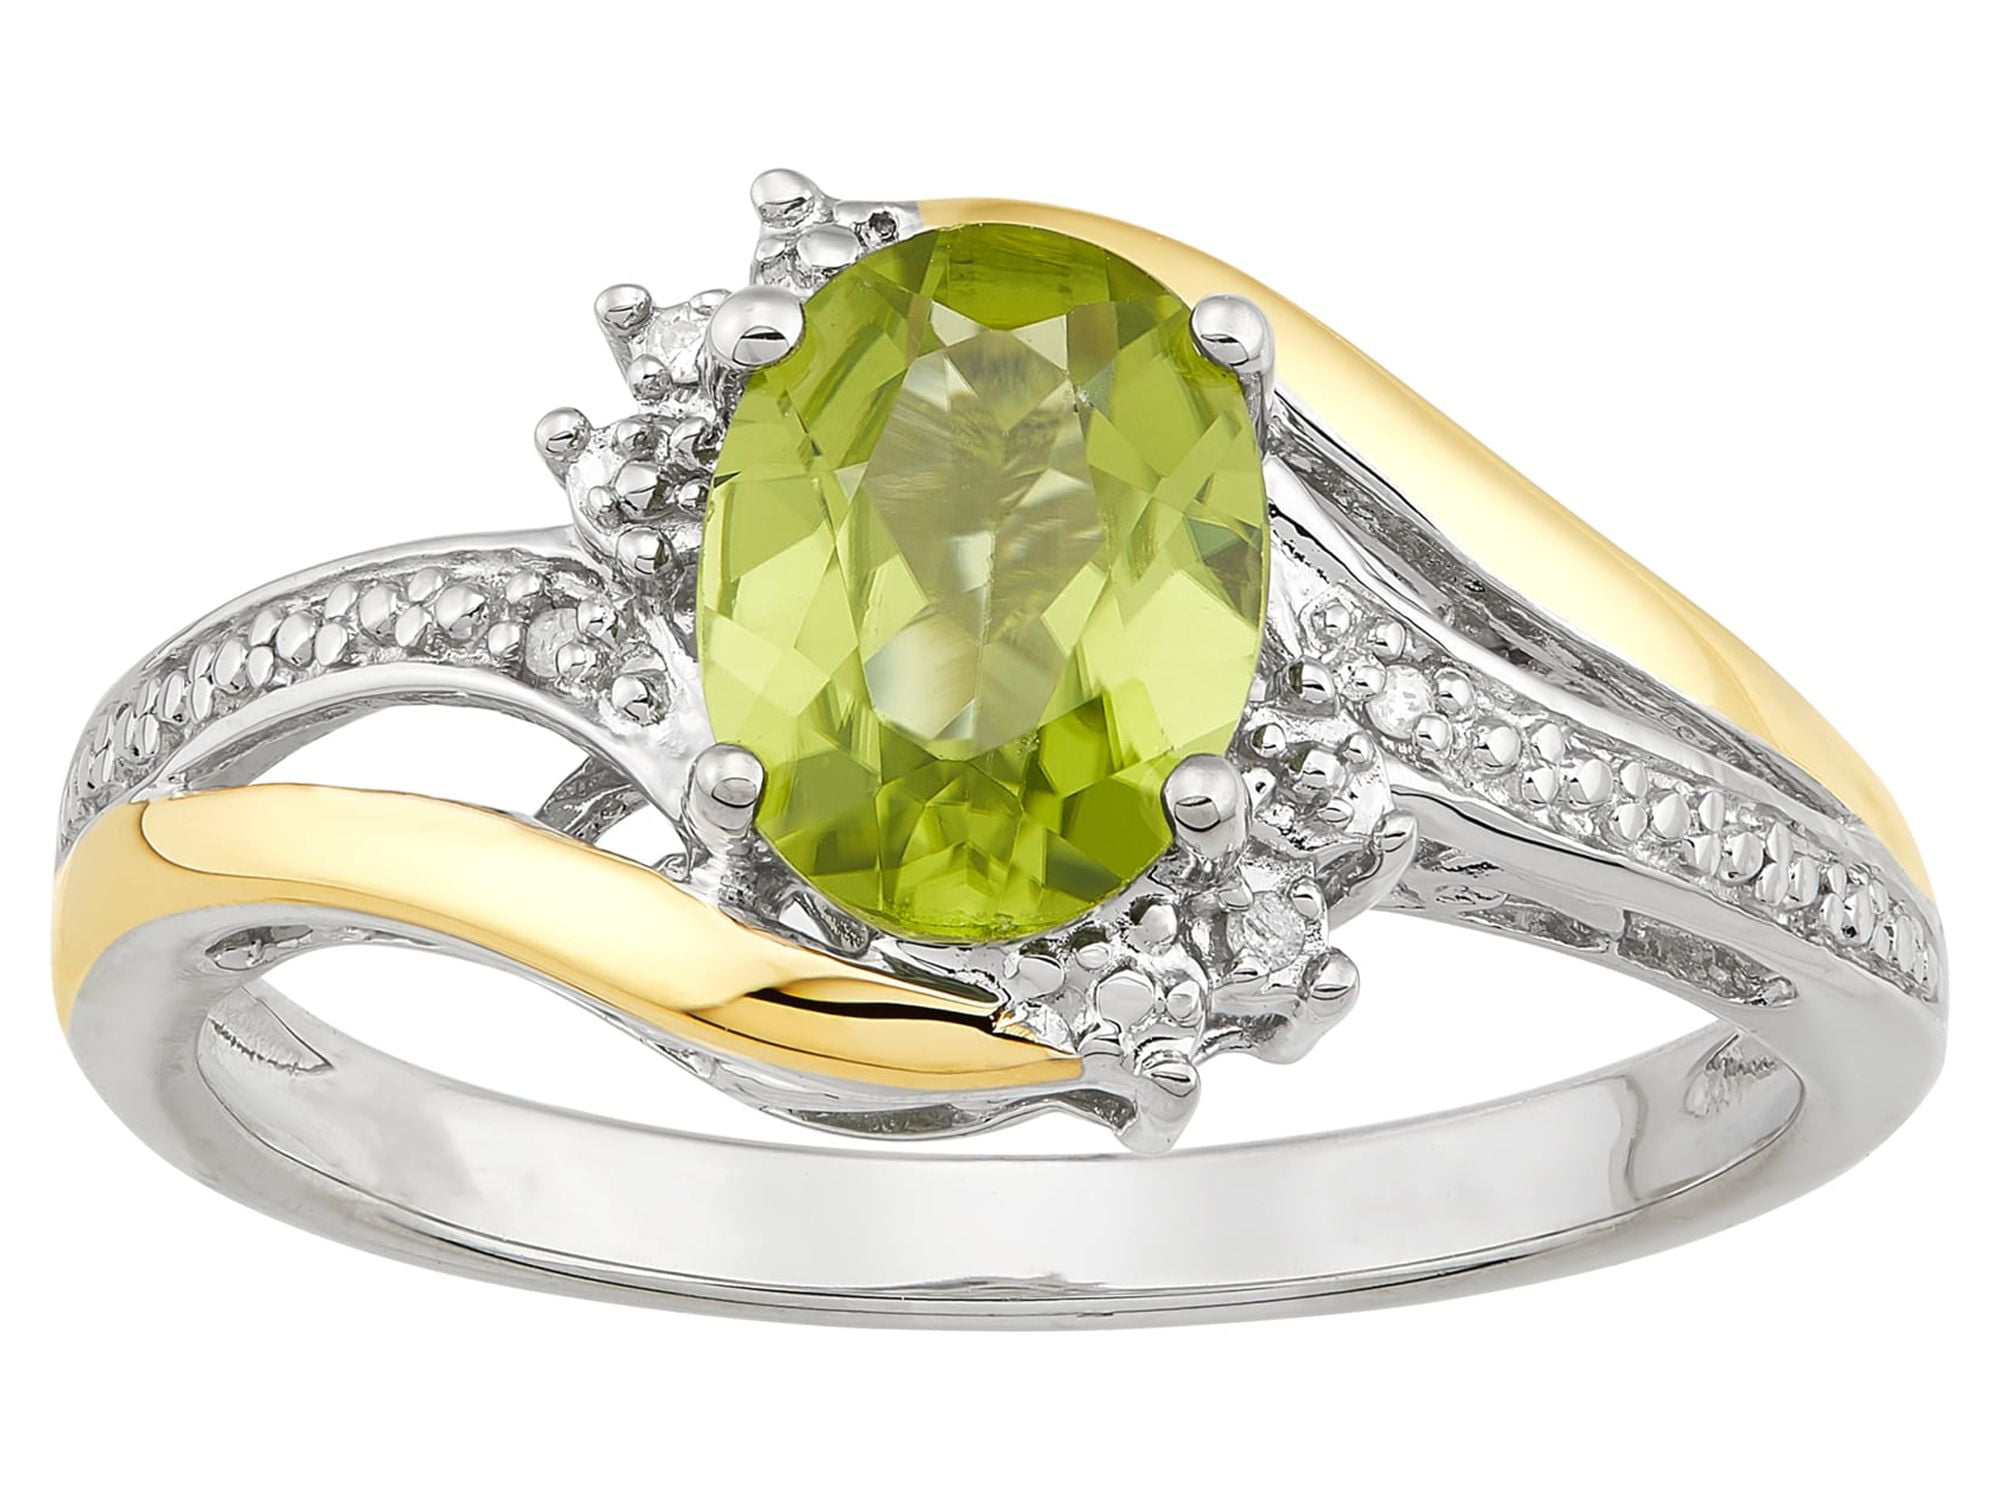 Accent Peridot in Jewelry Gold Silver Genuine and Yellow Brilliance Diamond 10K Ring Fine Sterling